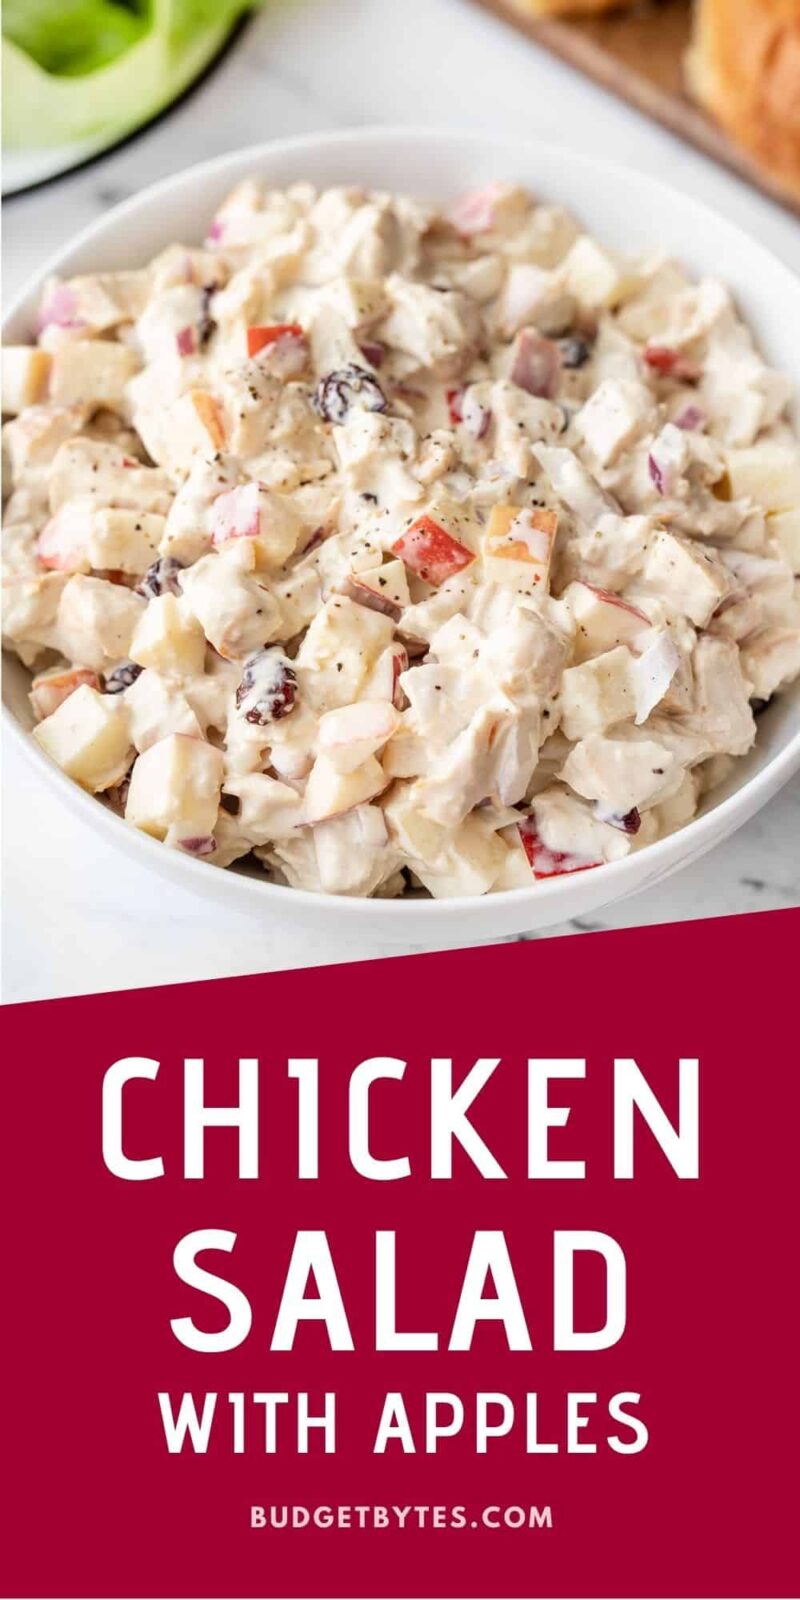 A bowl of chicken salad with apples, title text at the bottom